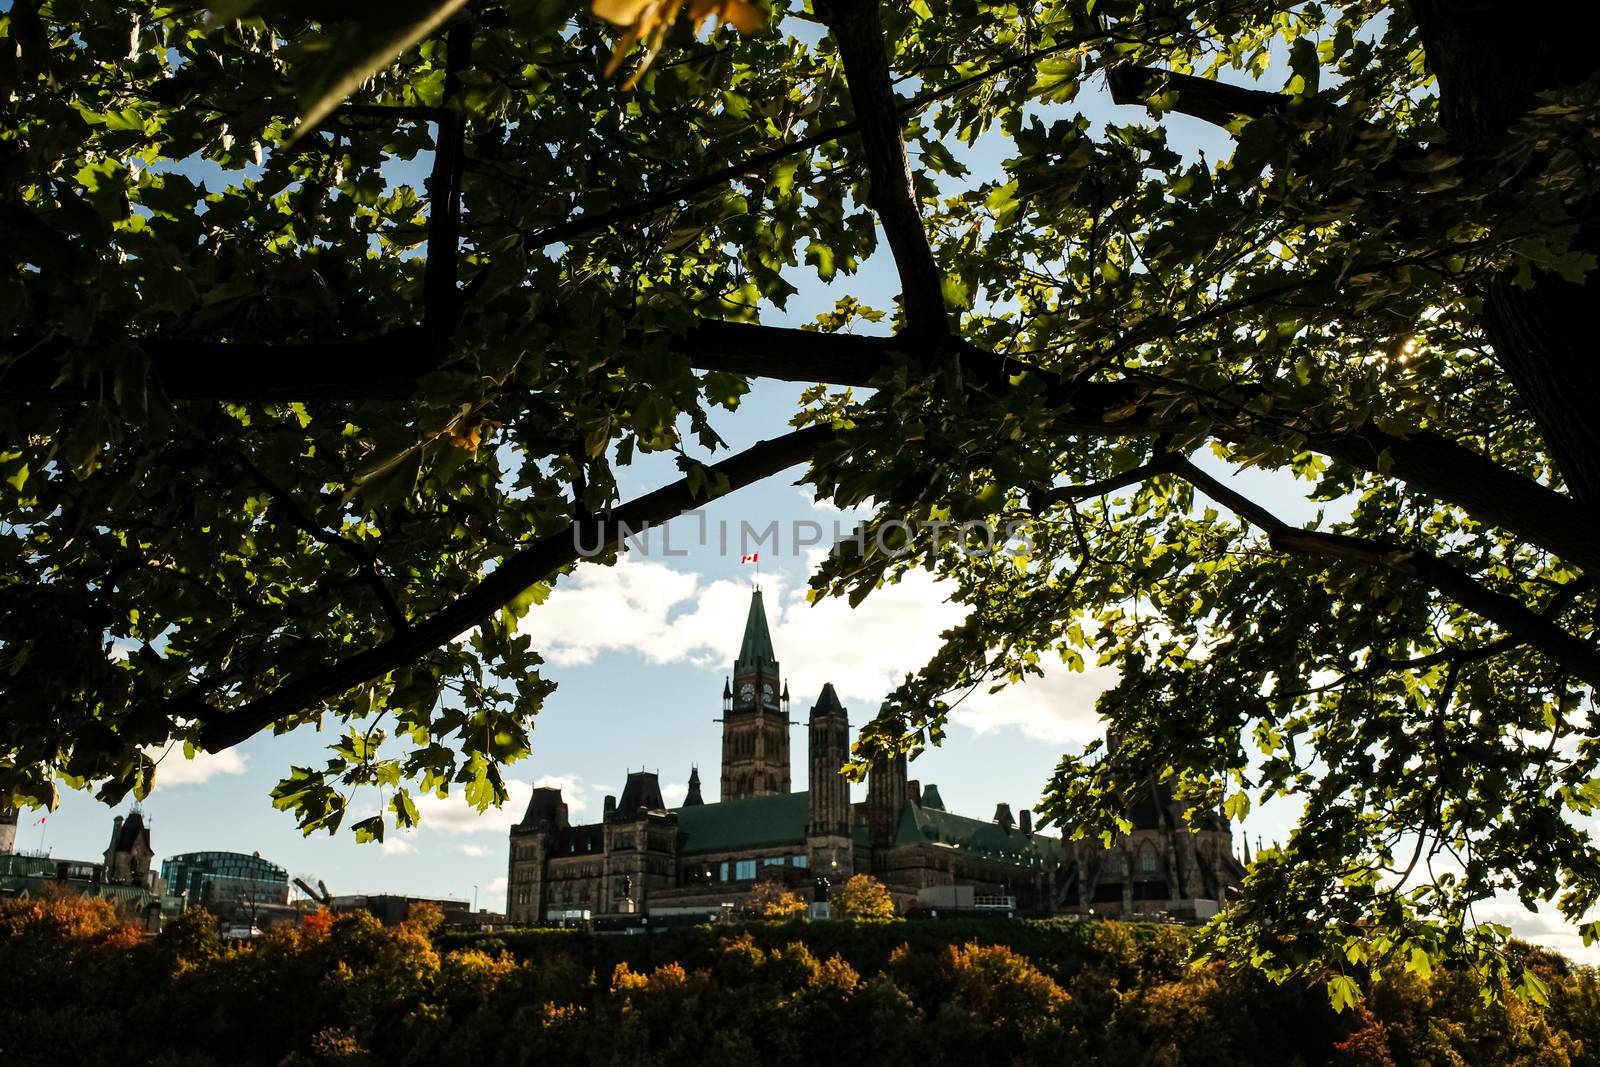 Canadian Parliament Hill through the trees by colintemple